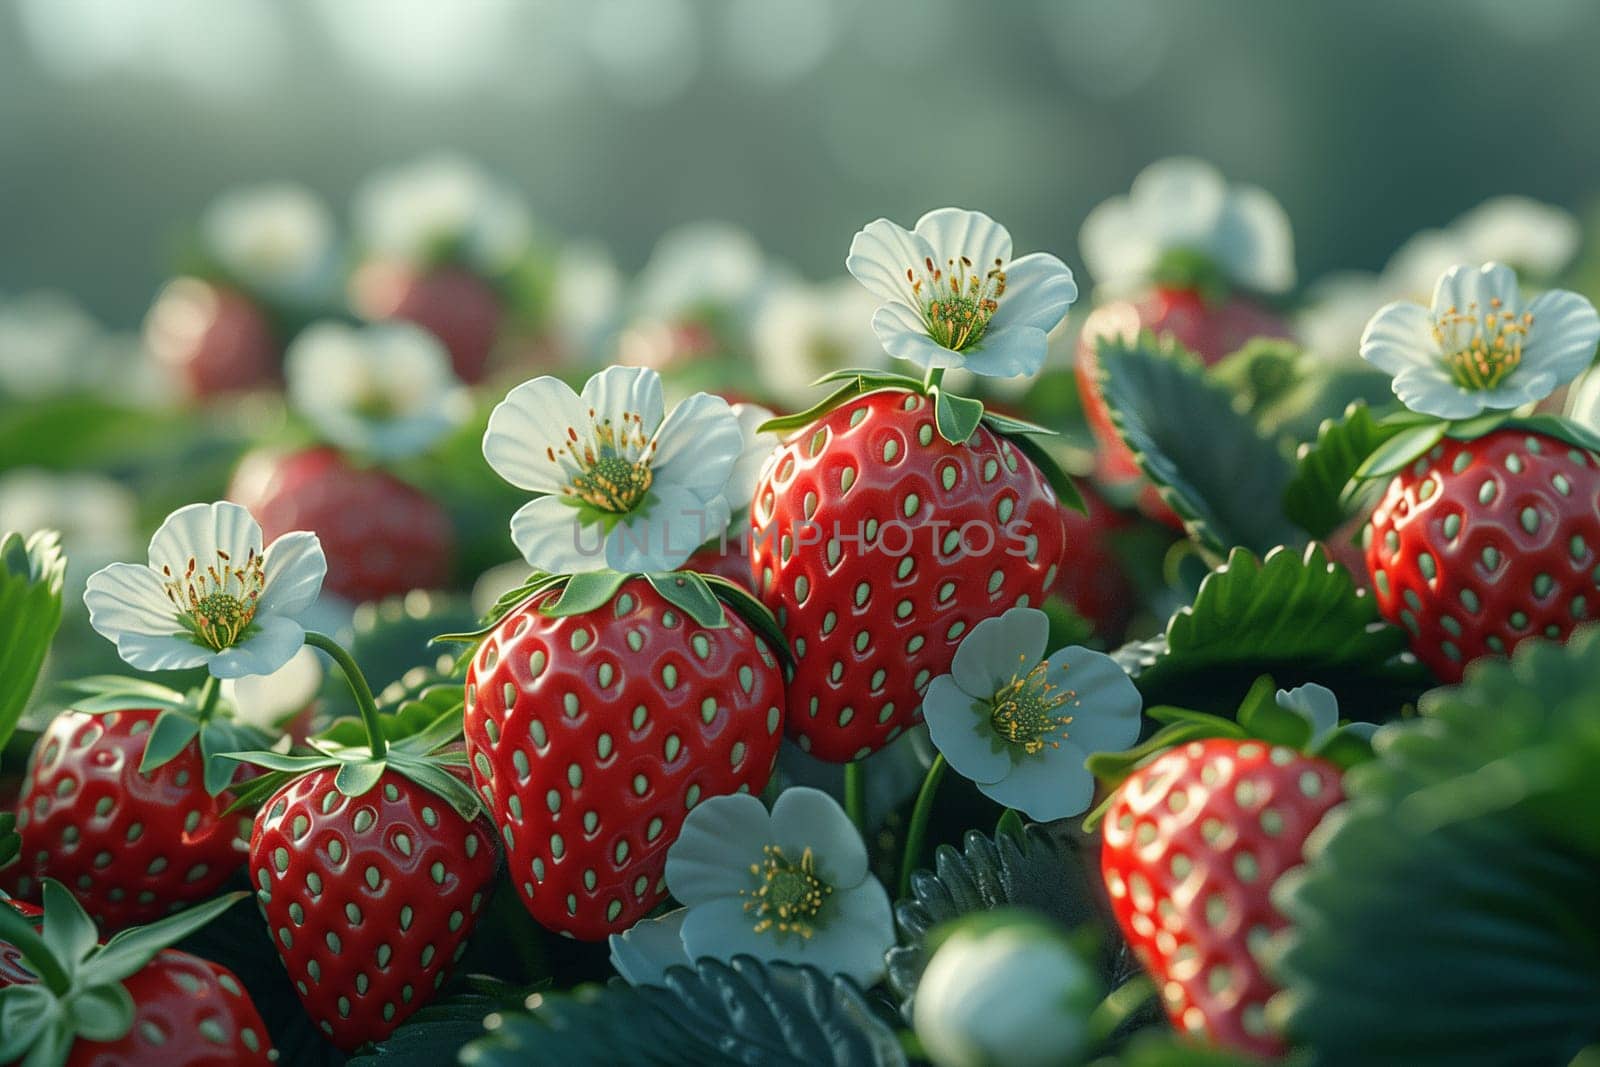 Multiple rows of strawberry plants with ripe red berries growing in a sunny field.